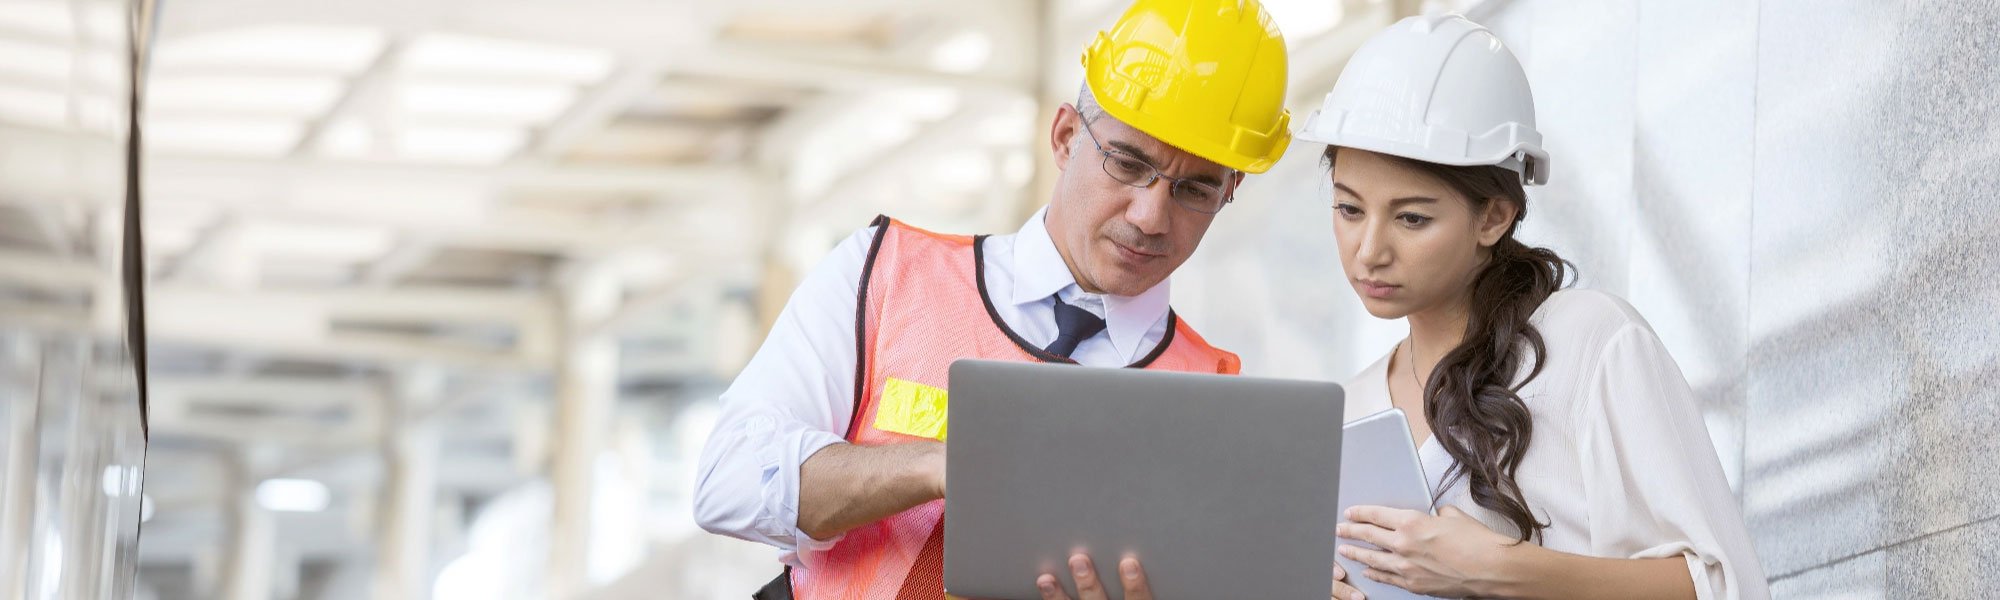 Construction managers looking at information on tablet